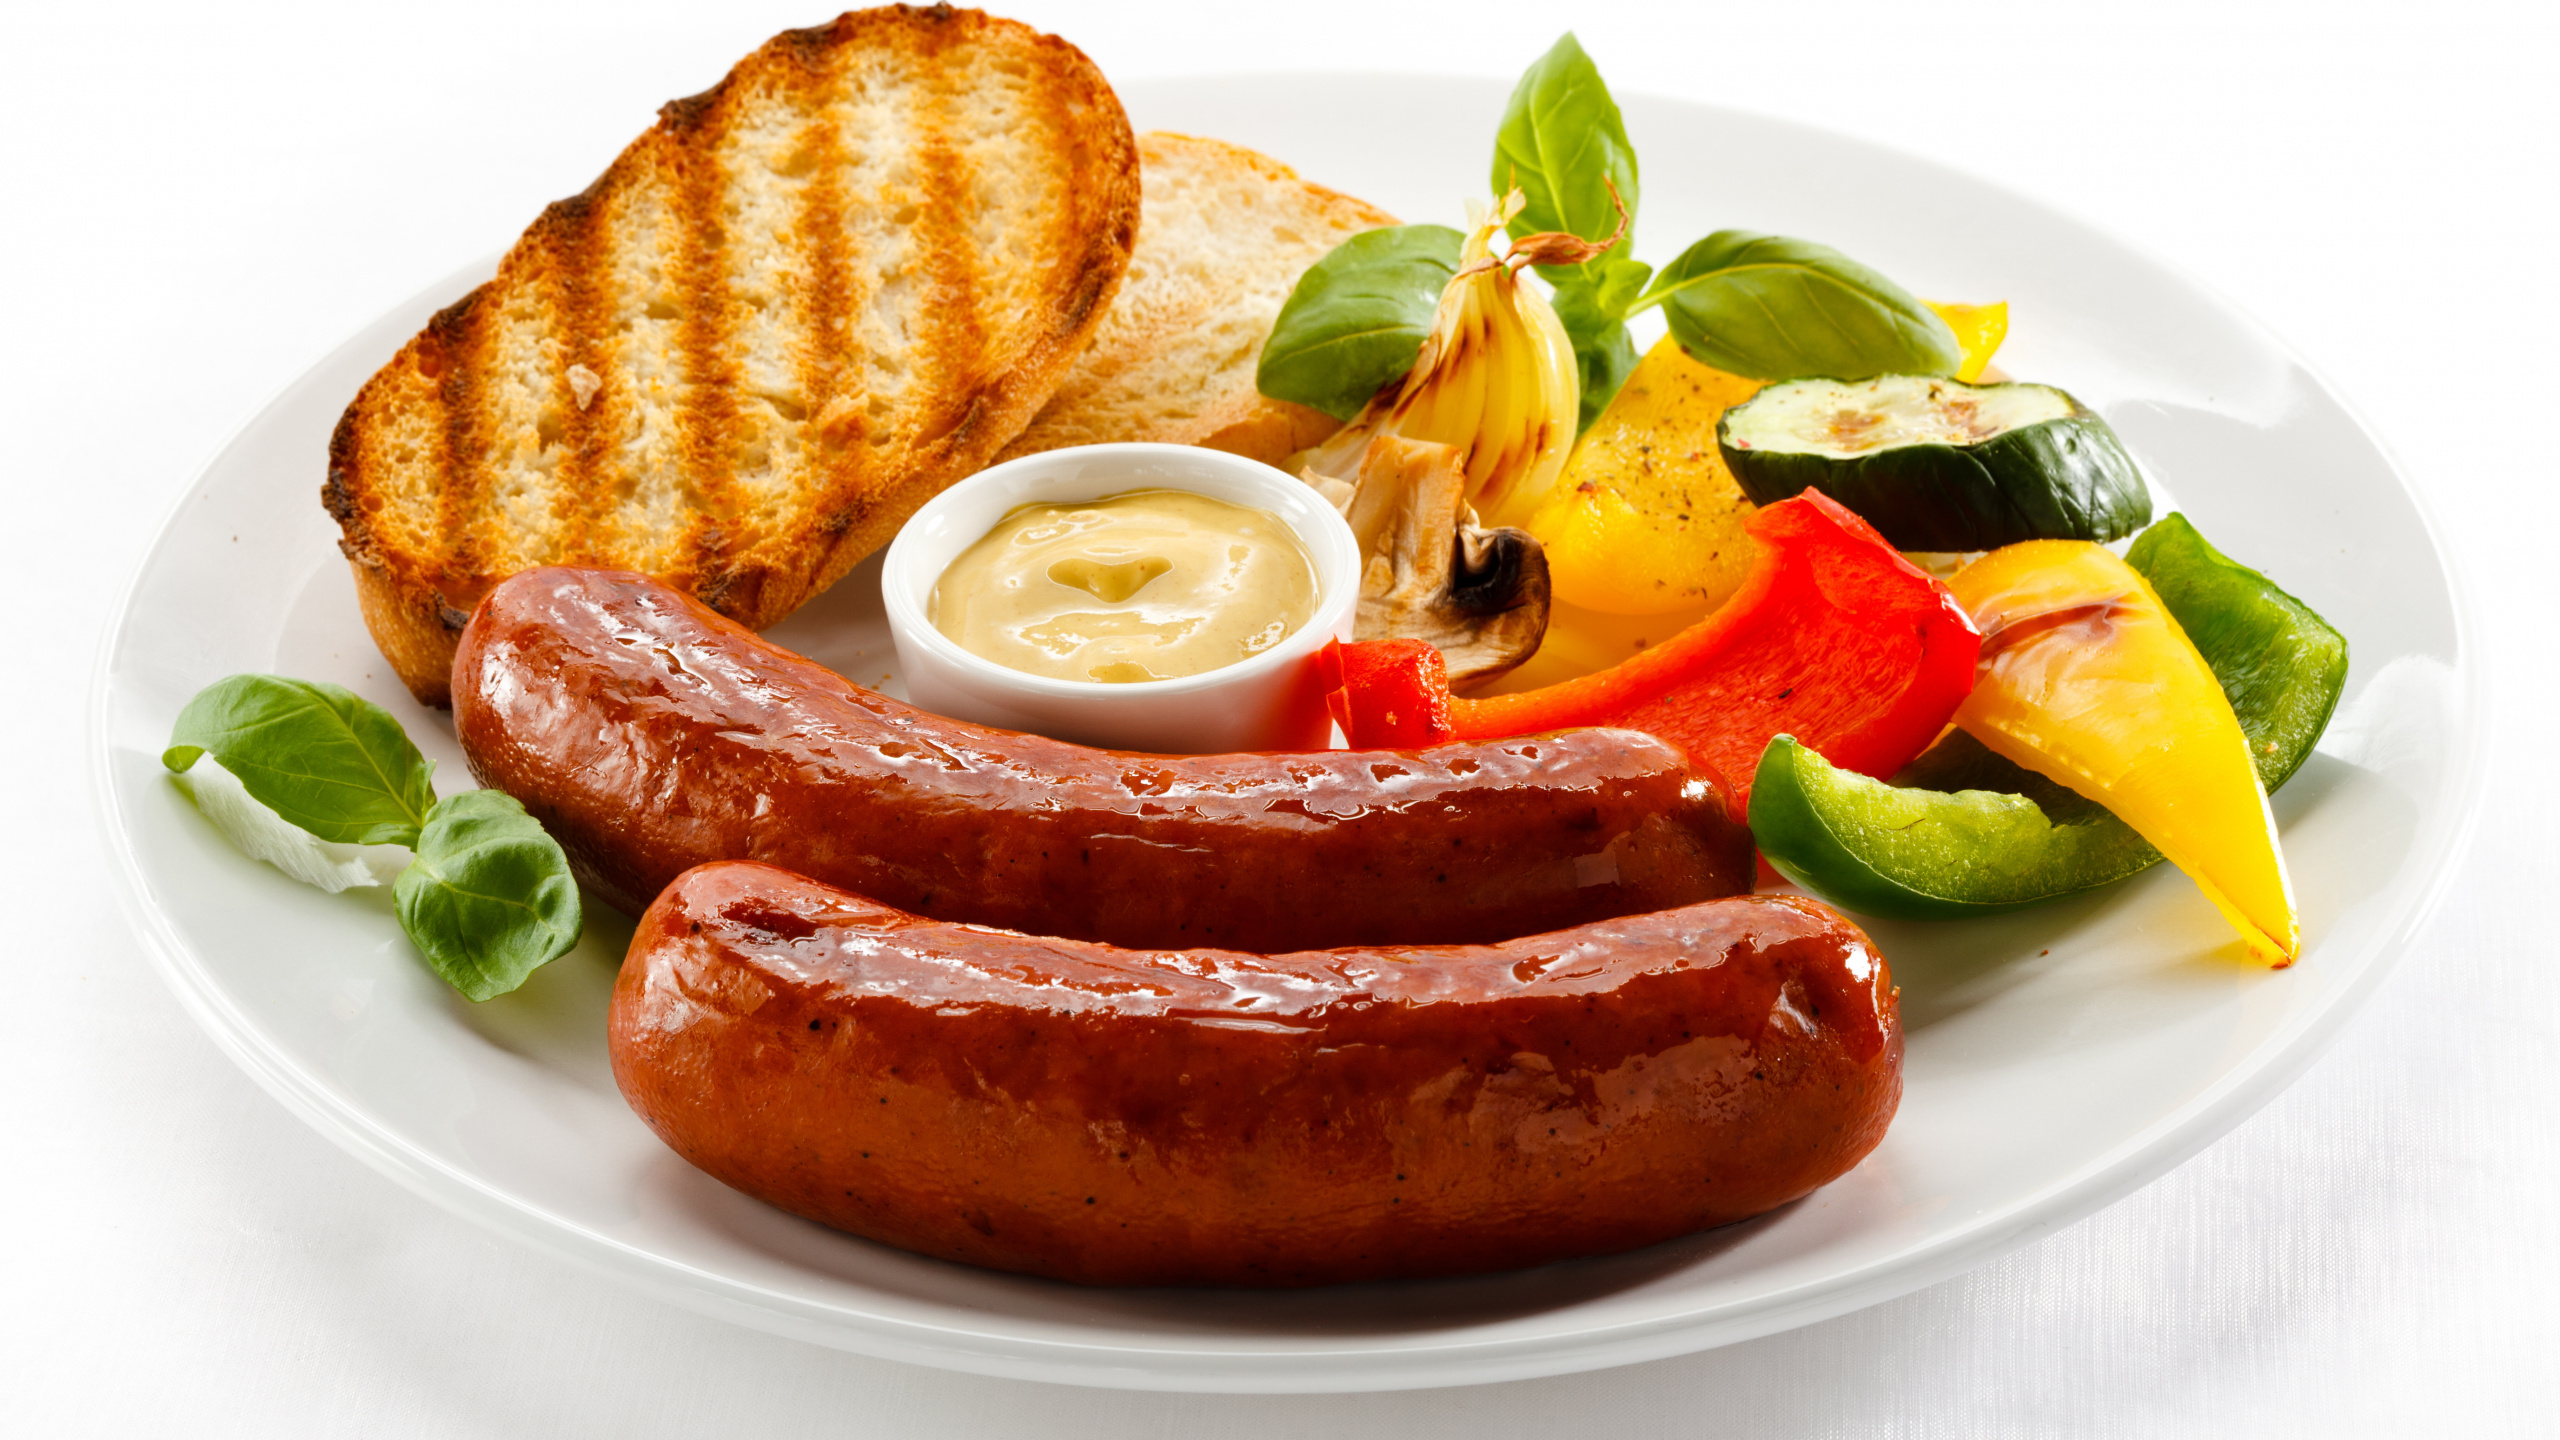 Sausage With Sliced Tomato and Cucumber on White Ceramic Plate. Wallpaper in 2560x1440 Resolution